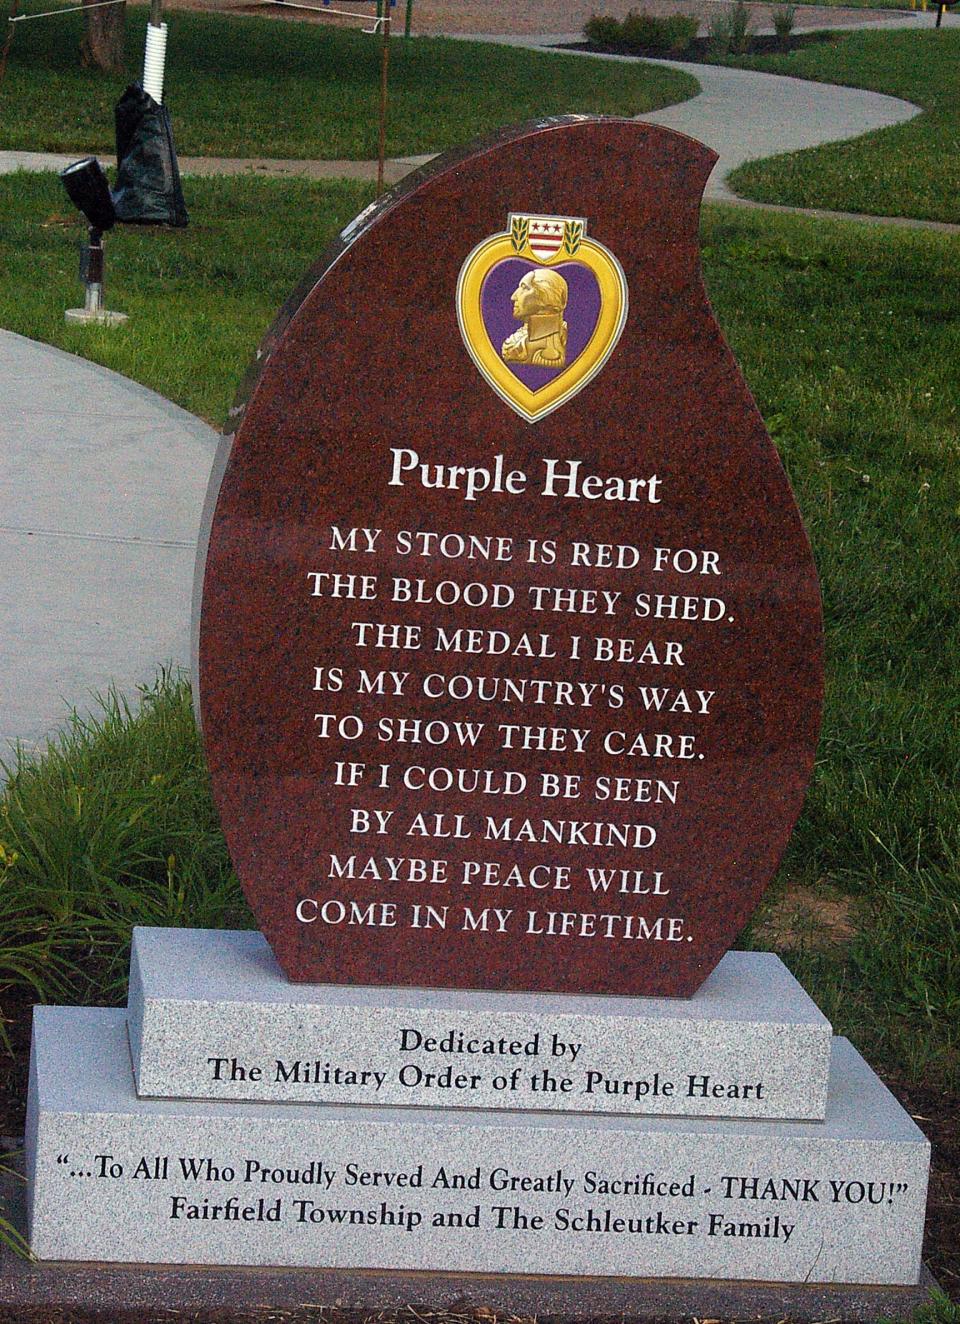 : This monument in Fairfield Township's Veterans Memorial at Heroes Park honors those wounded or killed in the line of duty